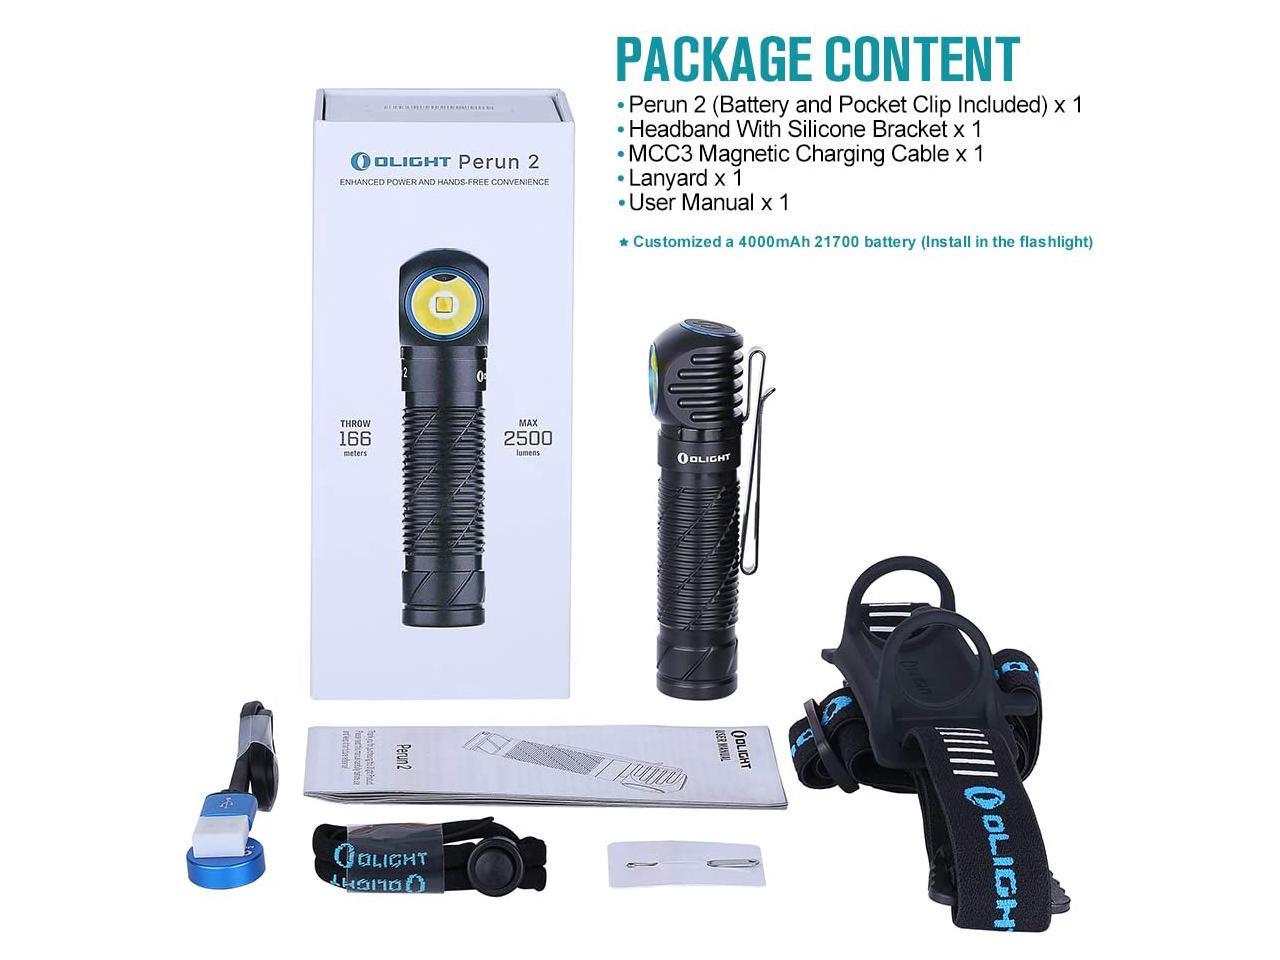 Olight Perun 2 2500 lumen rechargeable LED right angle torch With Headlamp 